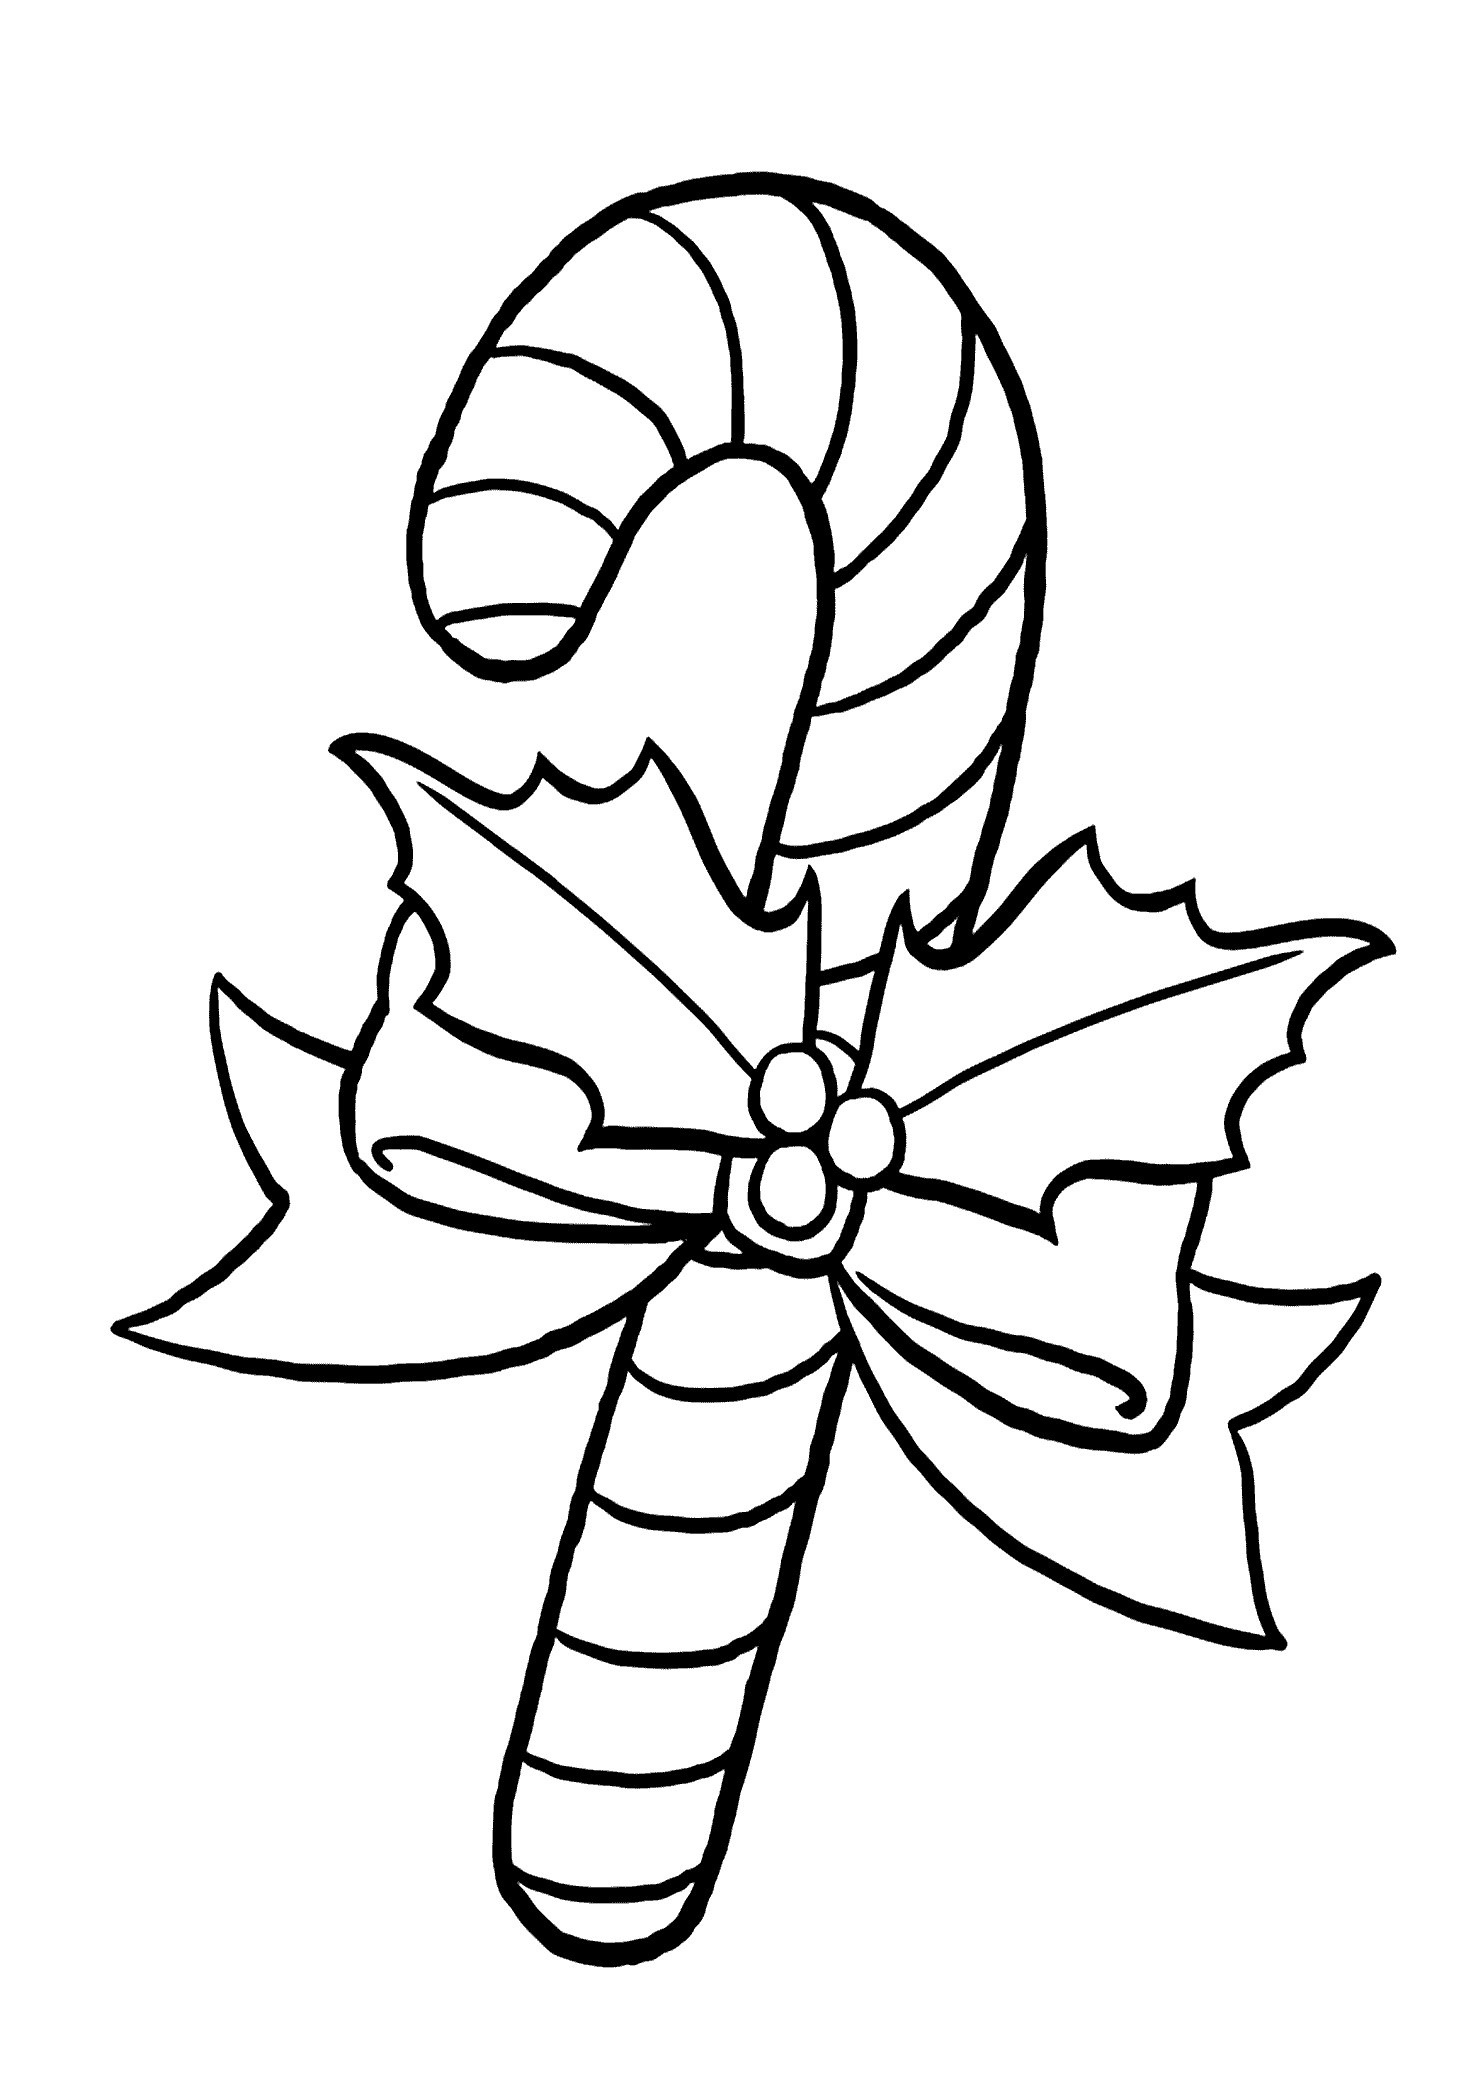 Candy Cane Christmas Coloring Pages - Coloring Pages For All Ages